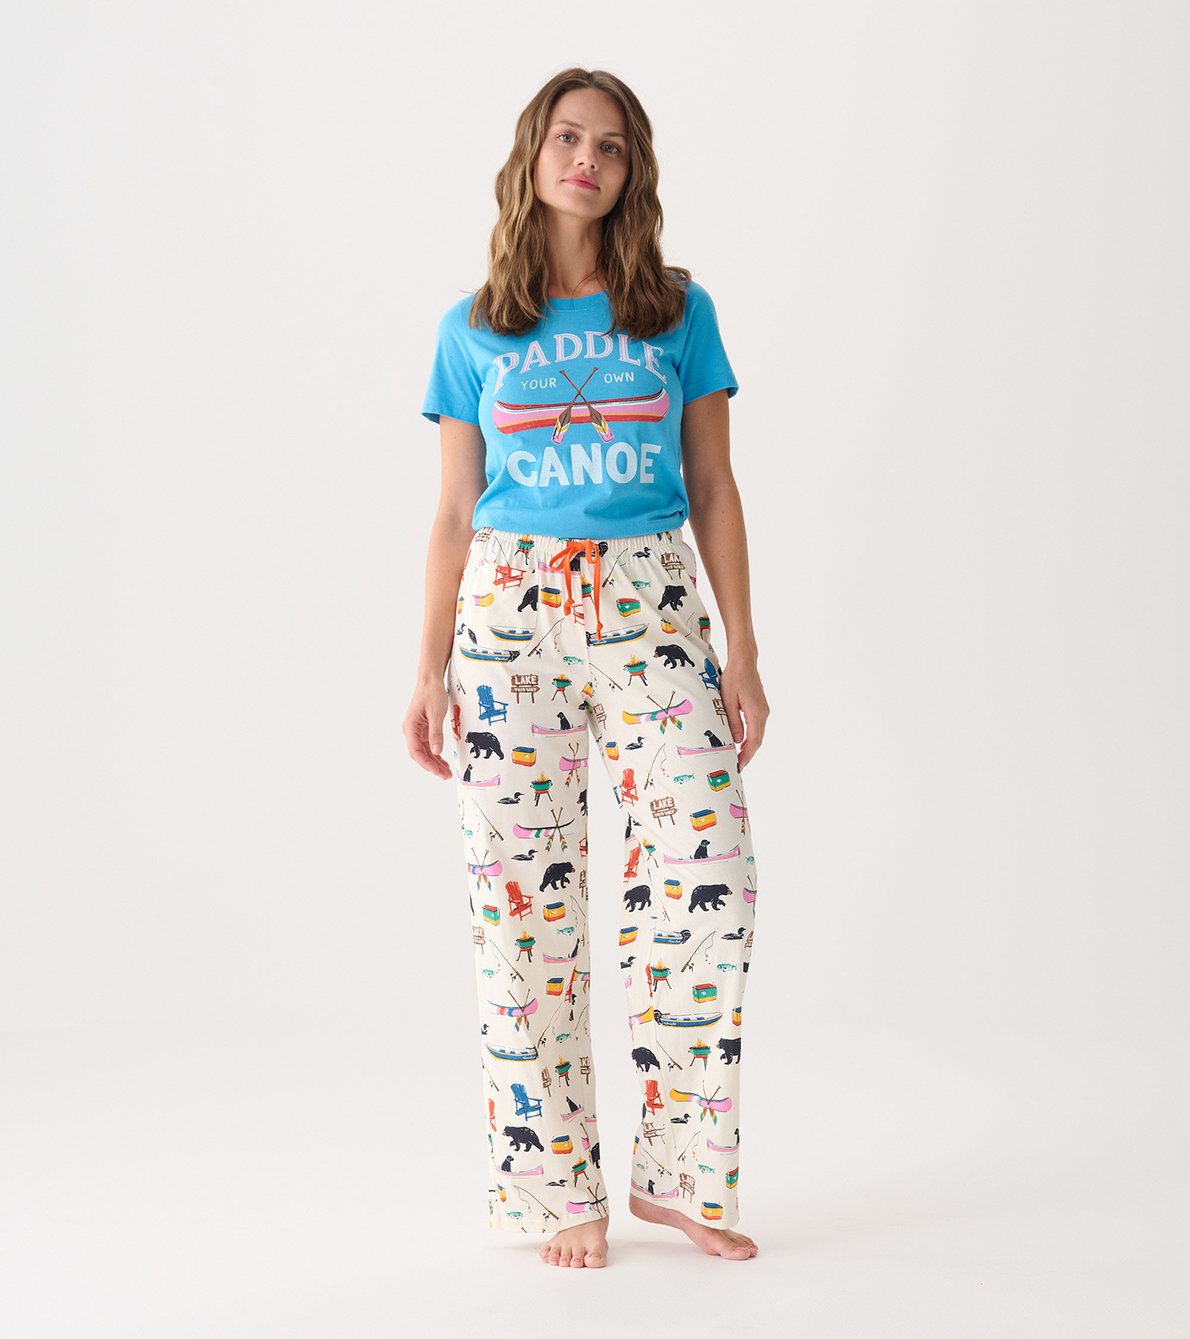 View larger image of Women's Paddle Your Own Canoe T-Shirt and Pants Pajama Separates